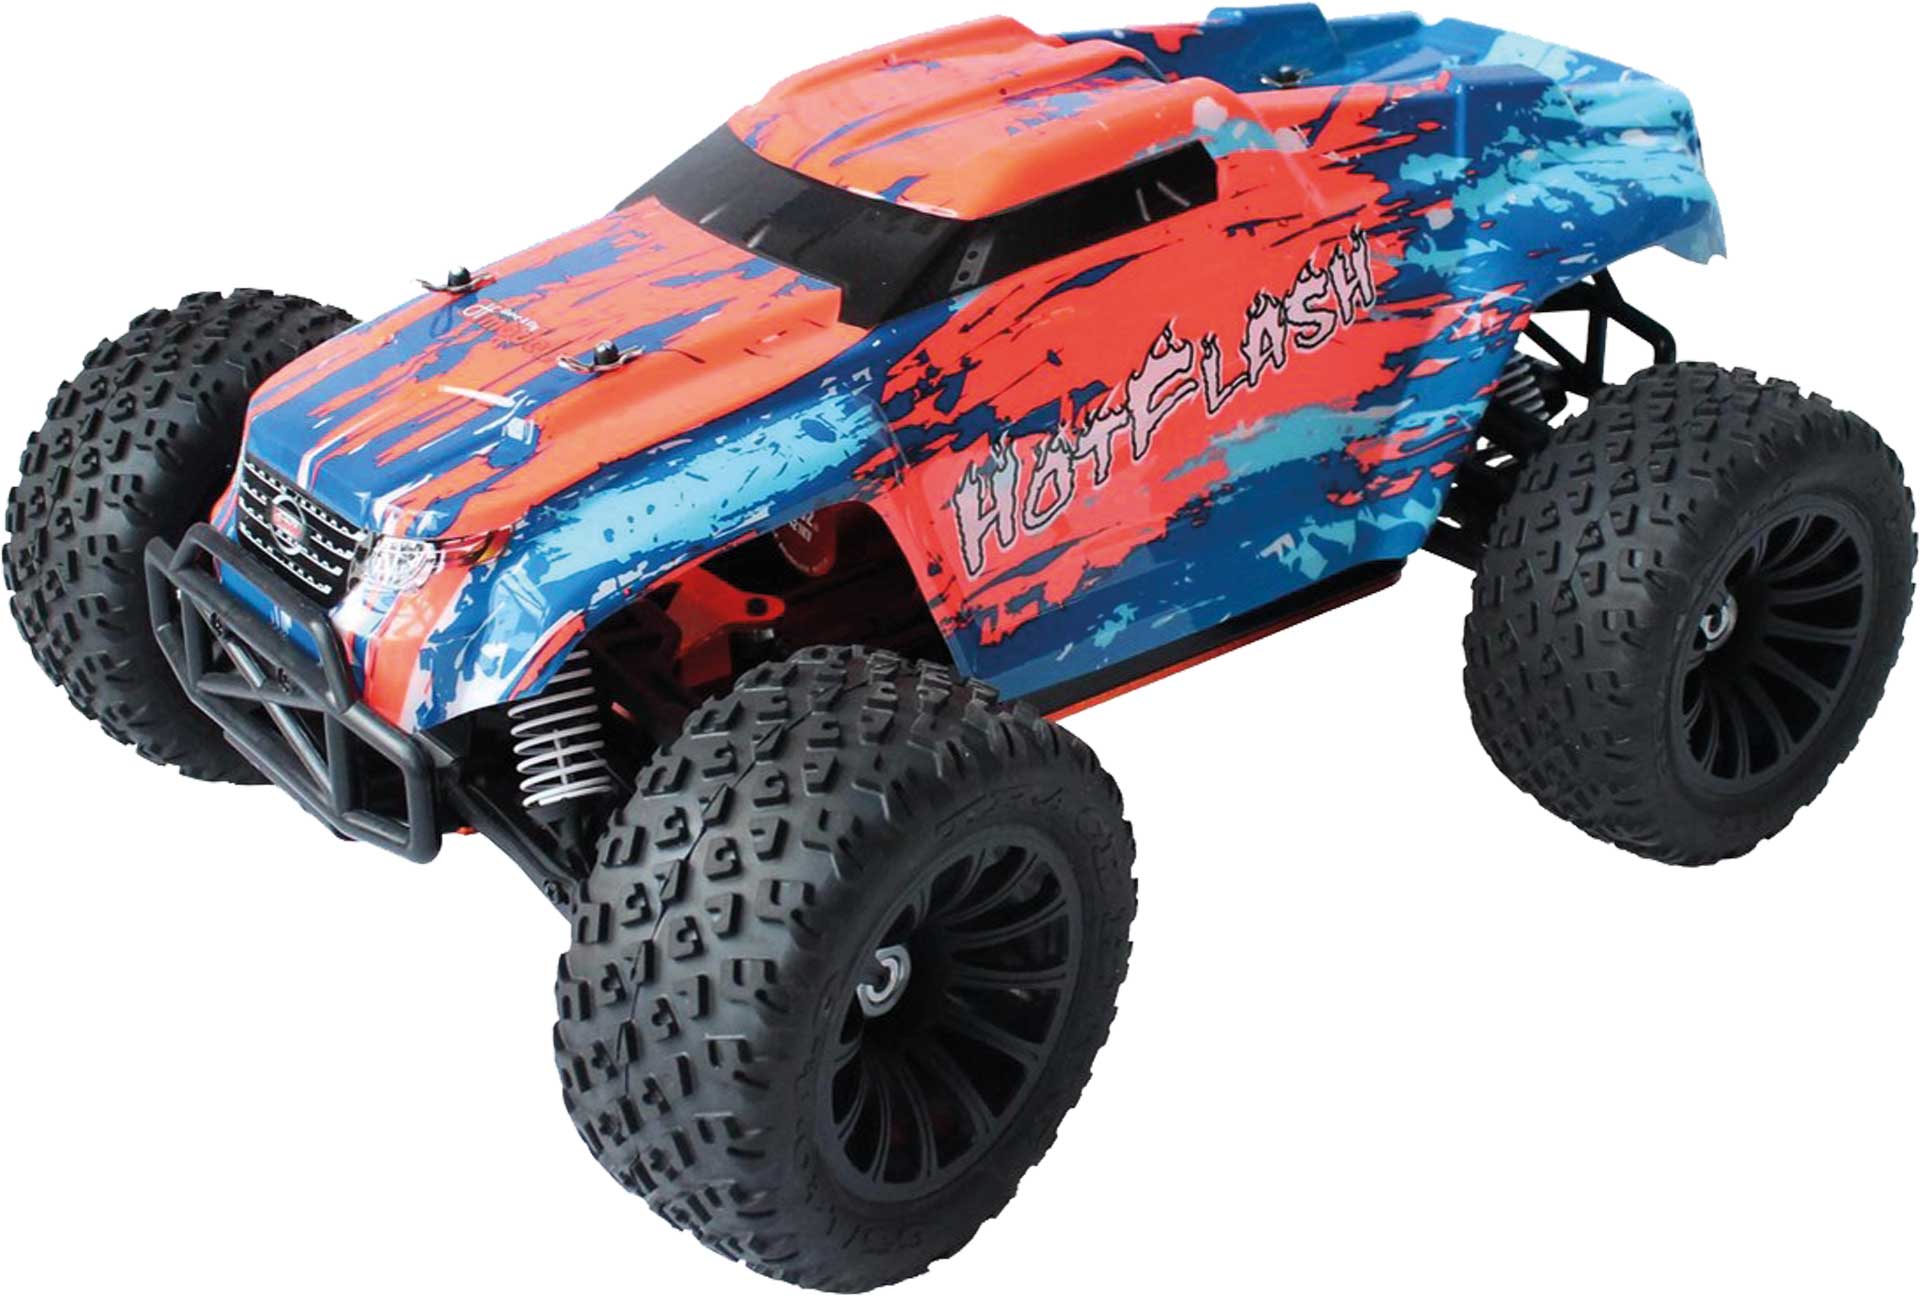 DRIVE & FLY MODELS HOT FLASH BRUSHLESS 1/10 XL TRUCK RTR 4WD